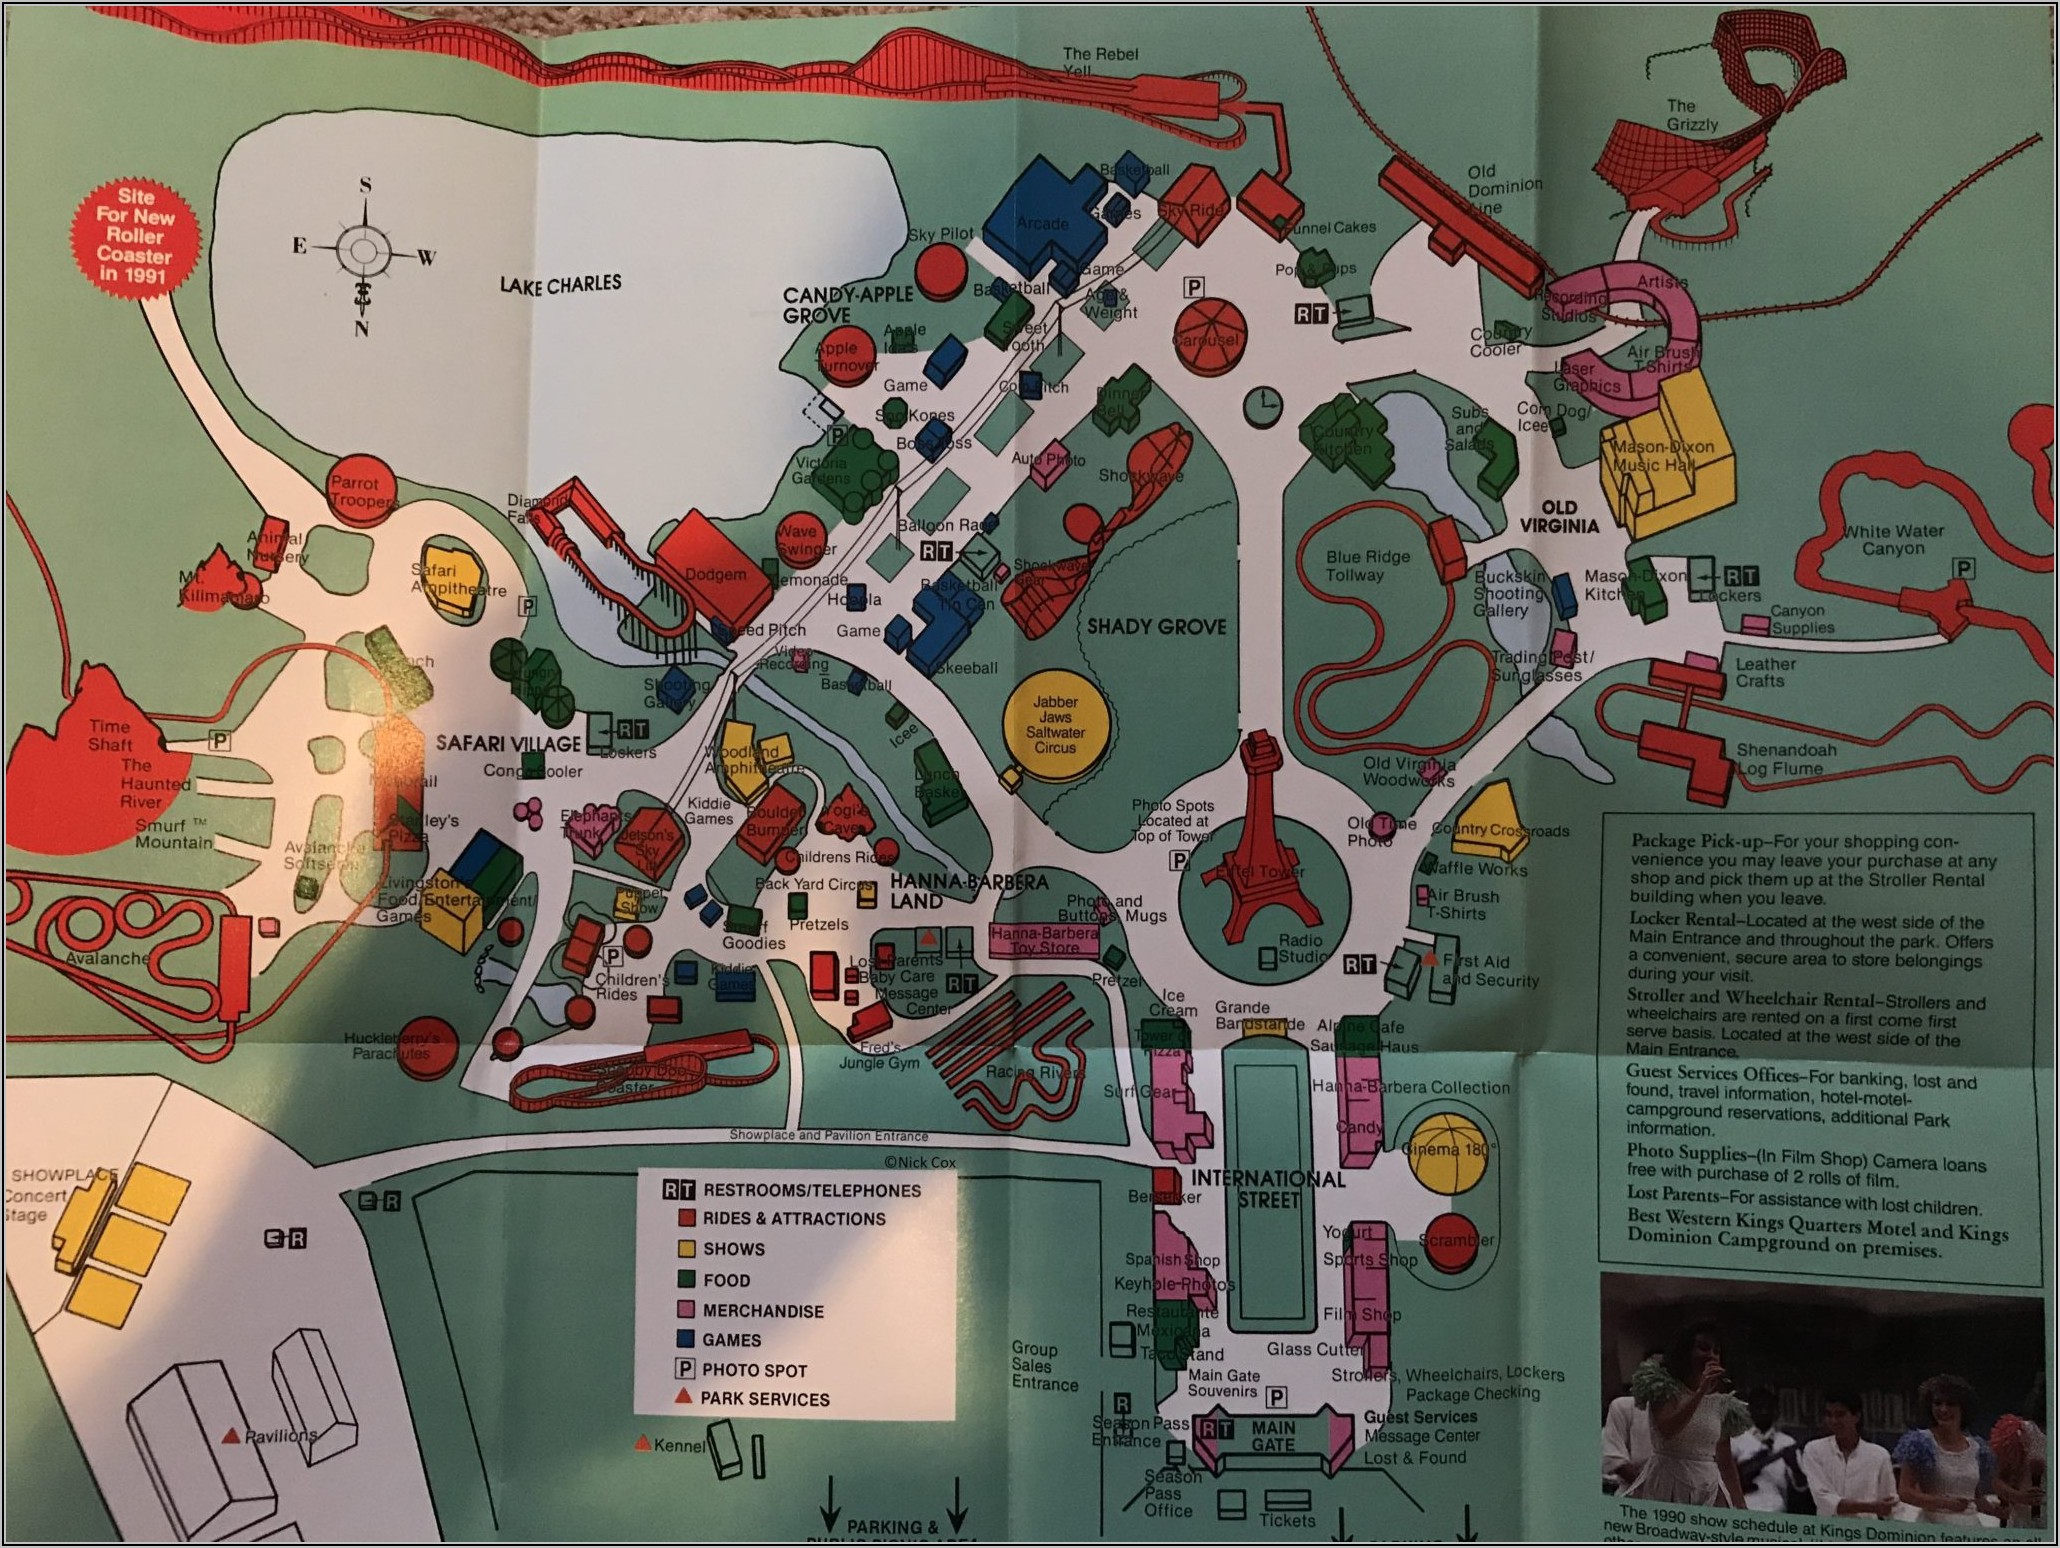 Kings Dominion Doswell Va Map